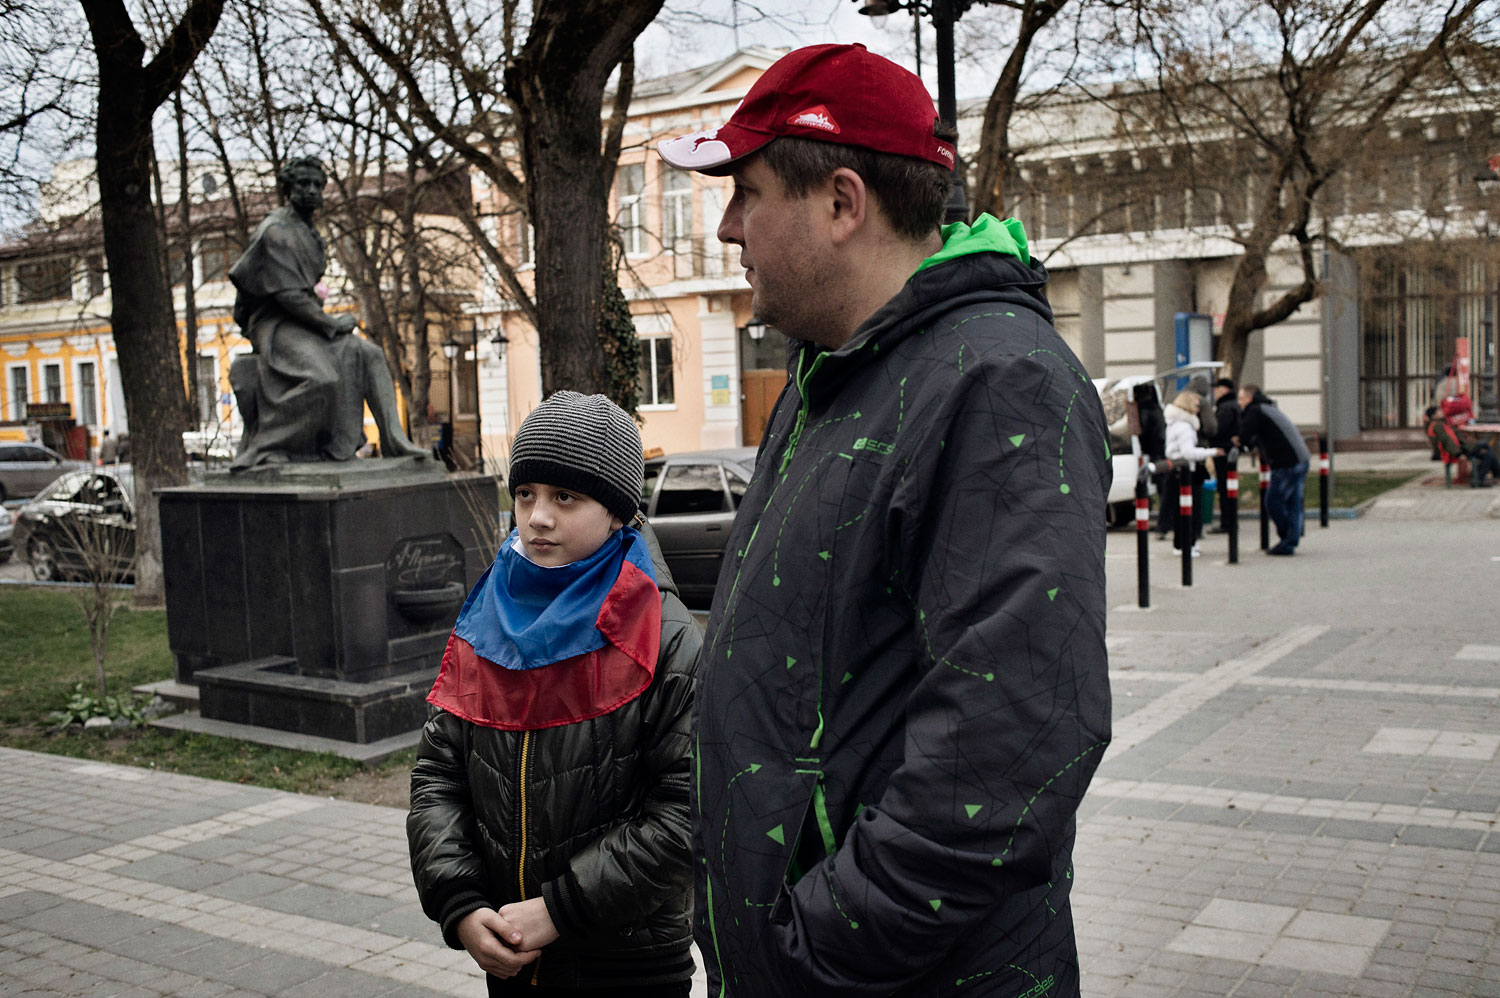 Ivan Drobkov, an ethnic Russian native of Crimea, walks near the regional parliament with his 9-year-old son Bogdan on March 17, 2014. (Yuri Kozyrev—NOOR for TIME)